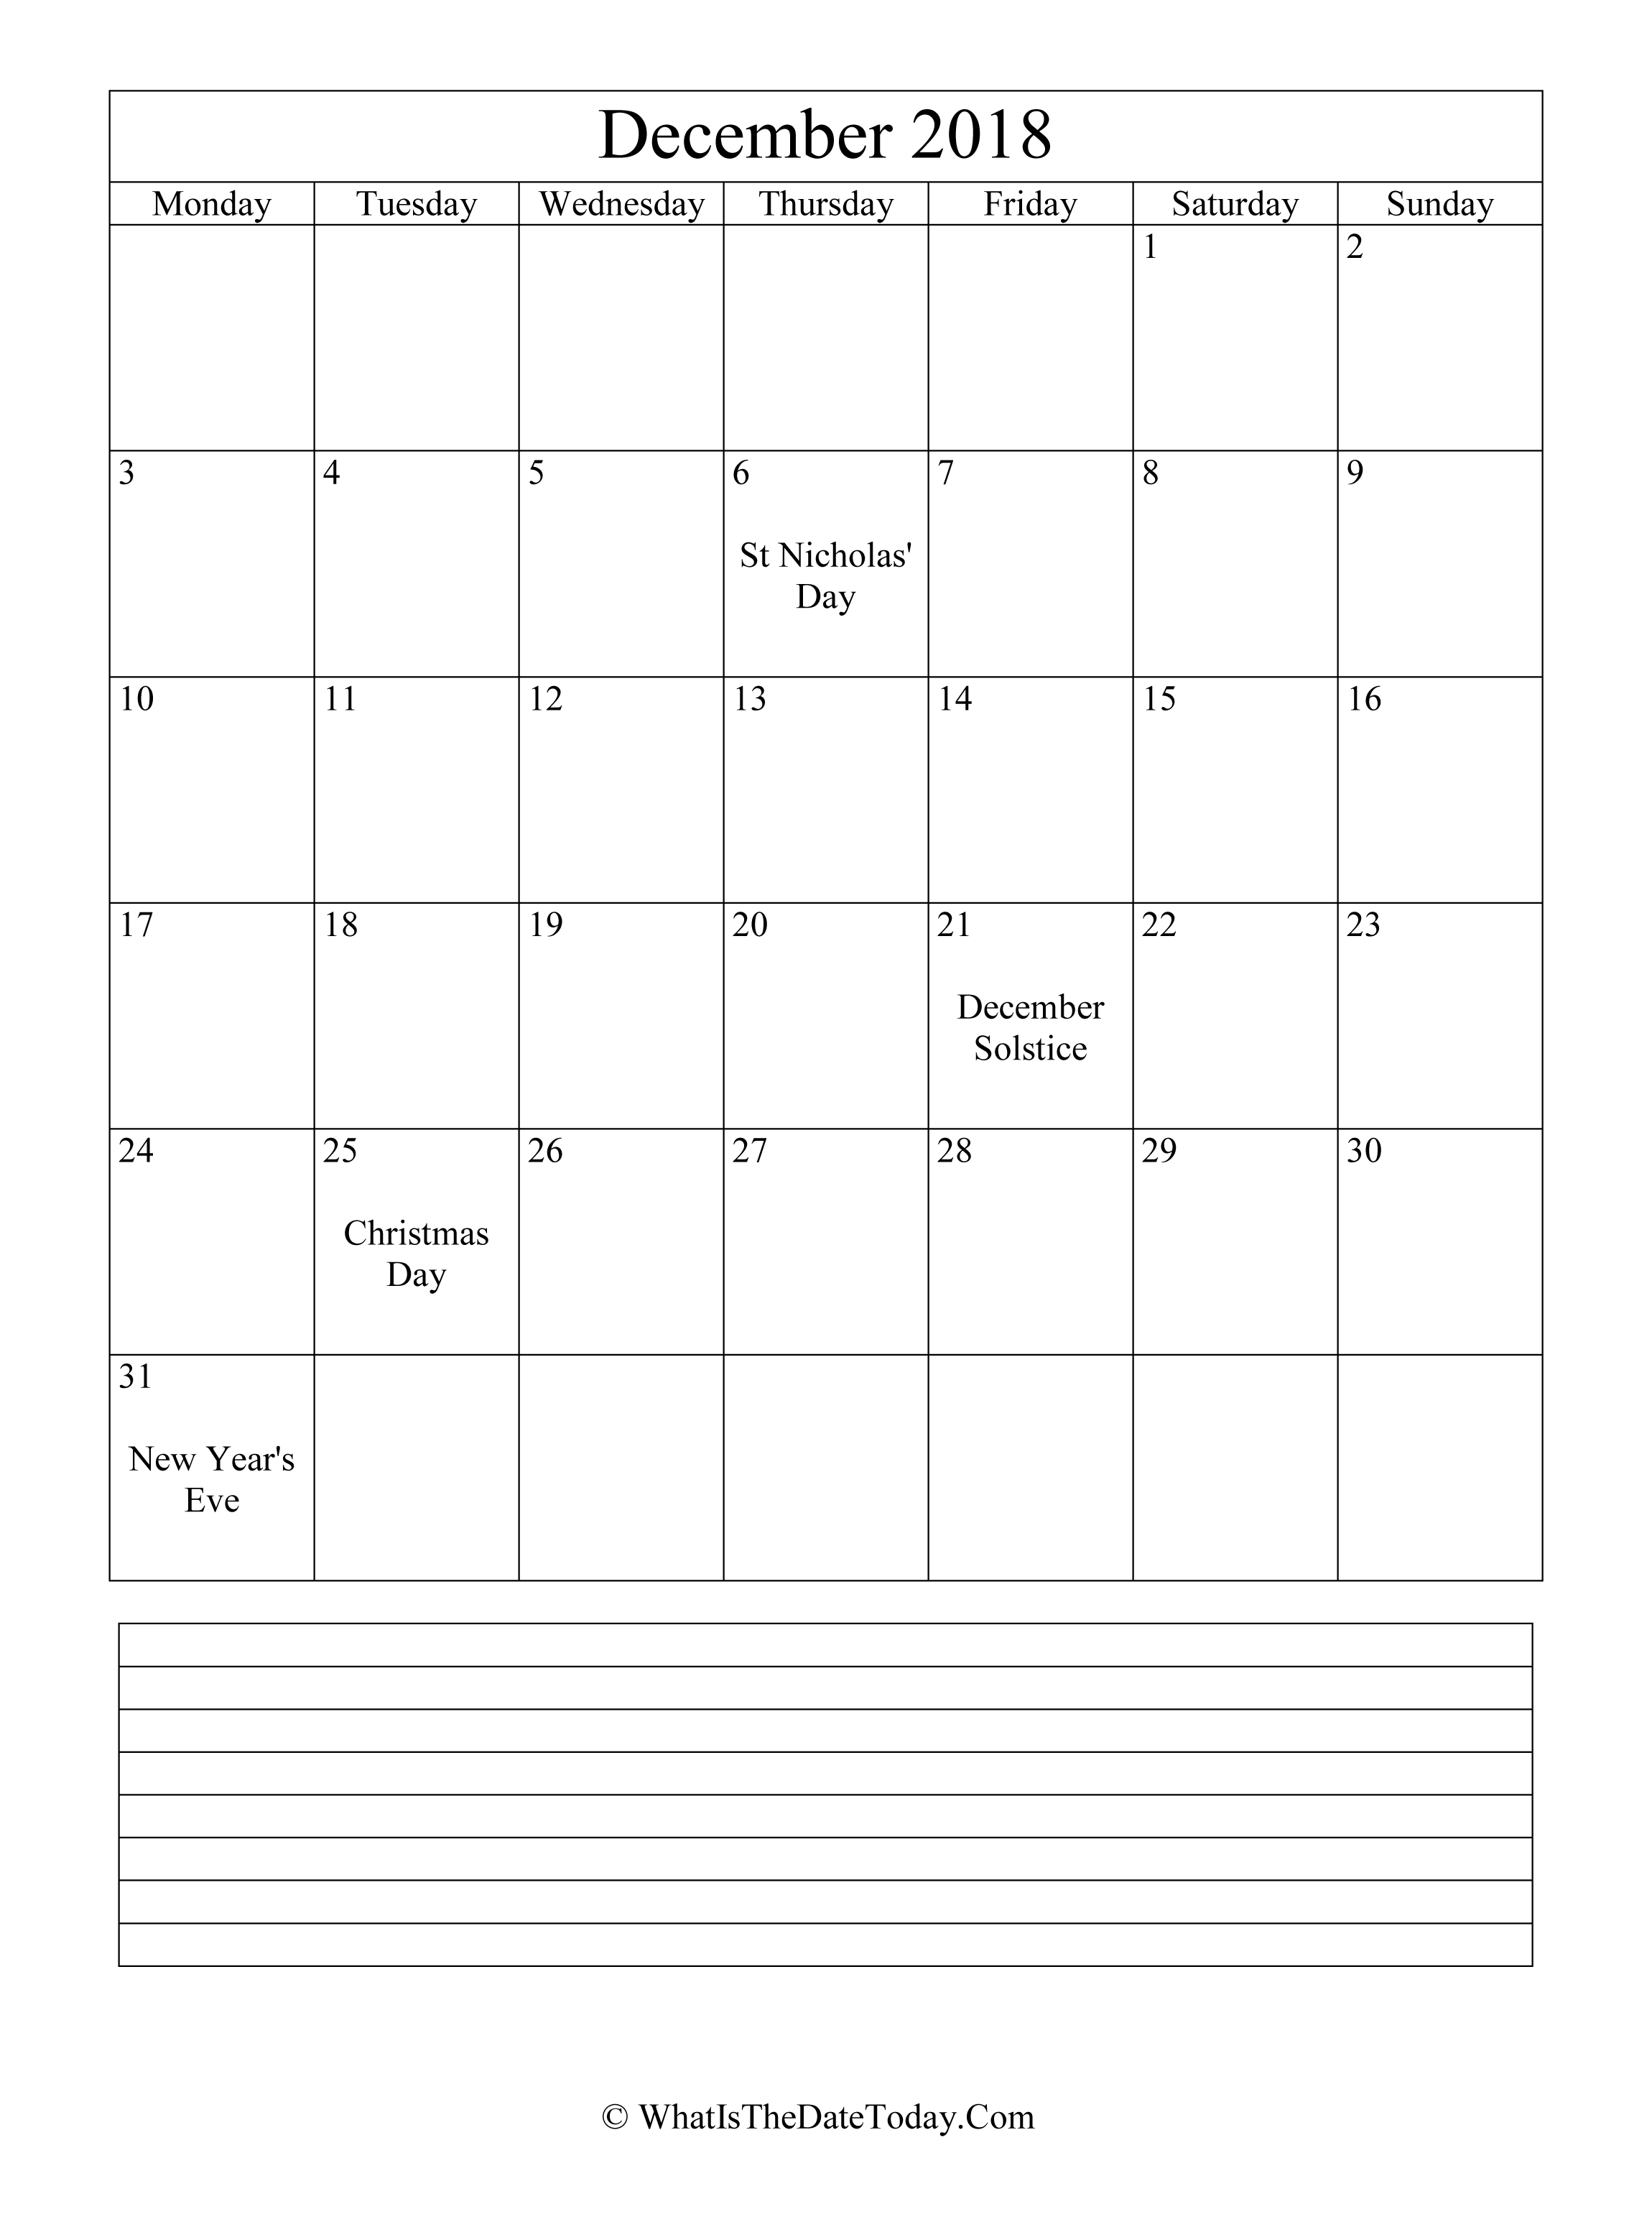 december-2018-calendar-editable-with-notes-space-vertical-layout